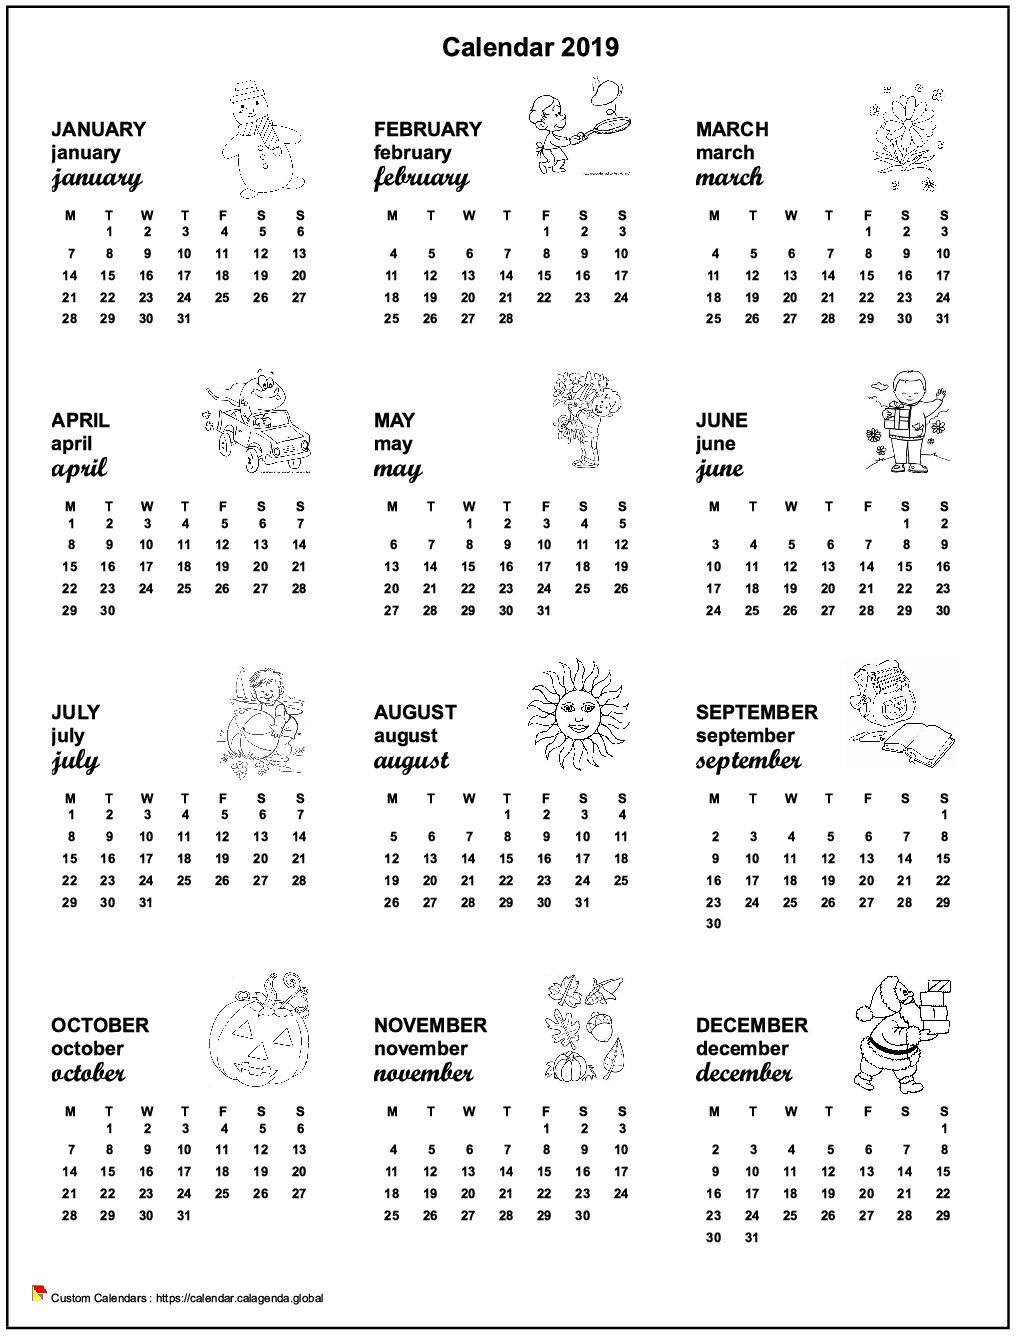 Calendar 2109 annual maternal and primary school